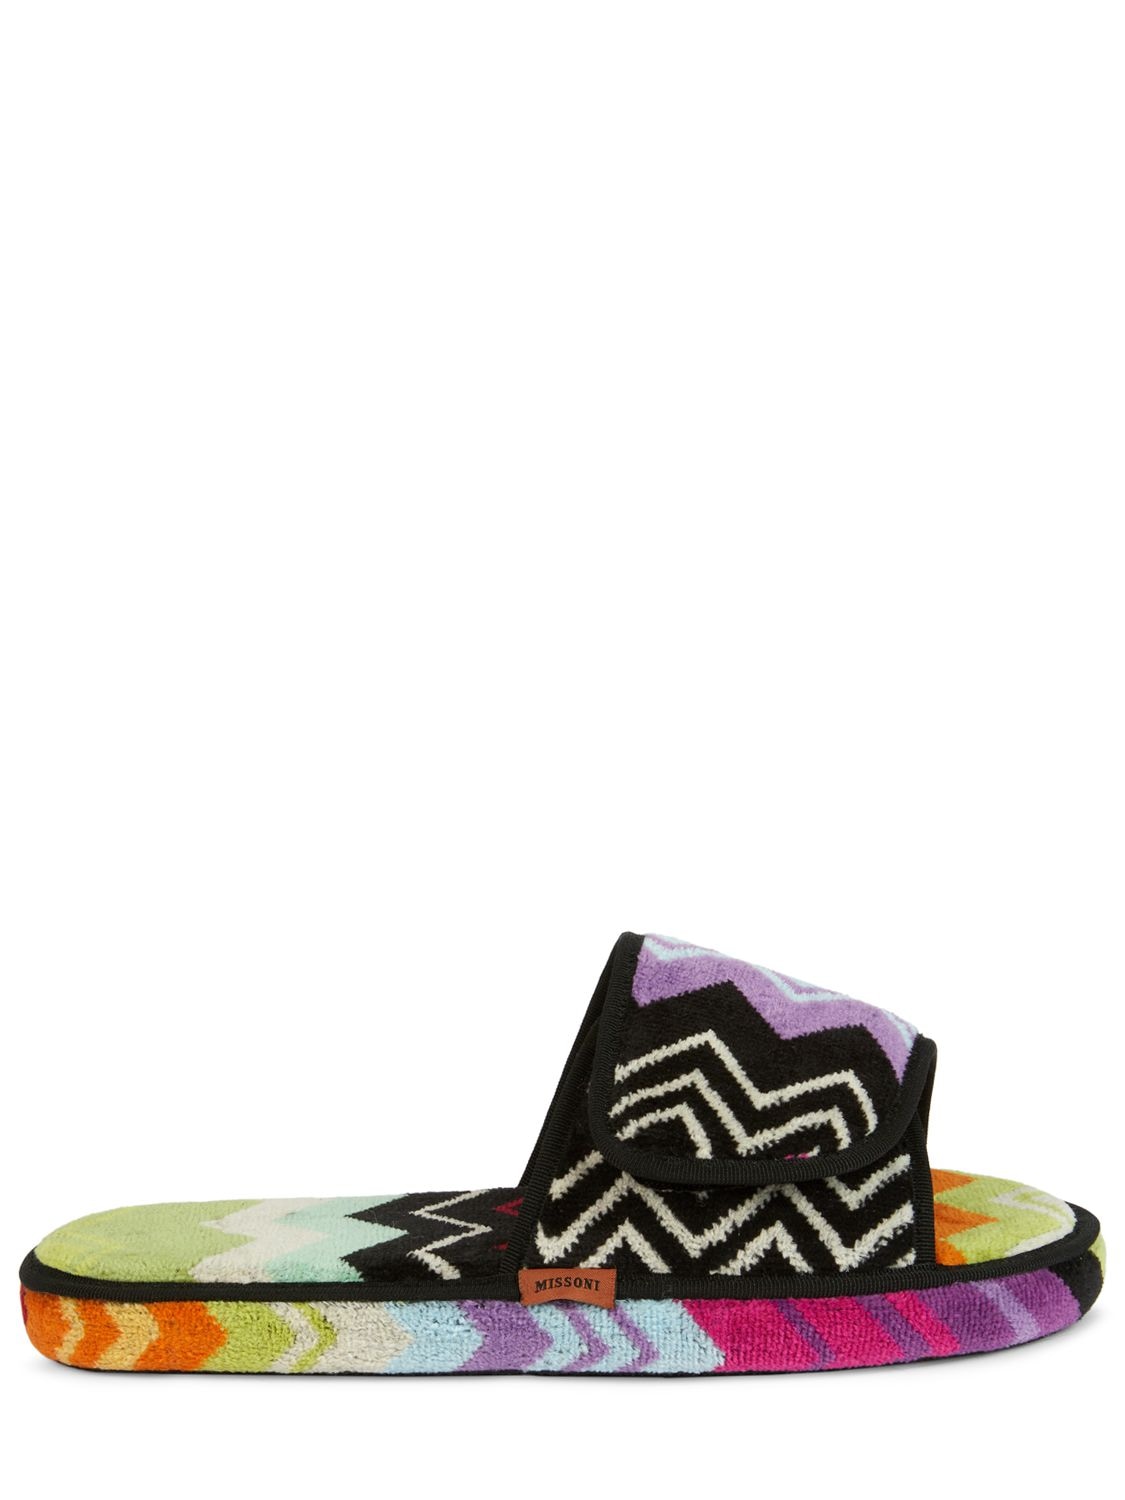 Missoni Home Collection Giacomo Slippers In Multicolor